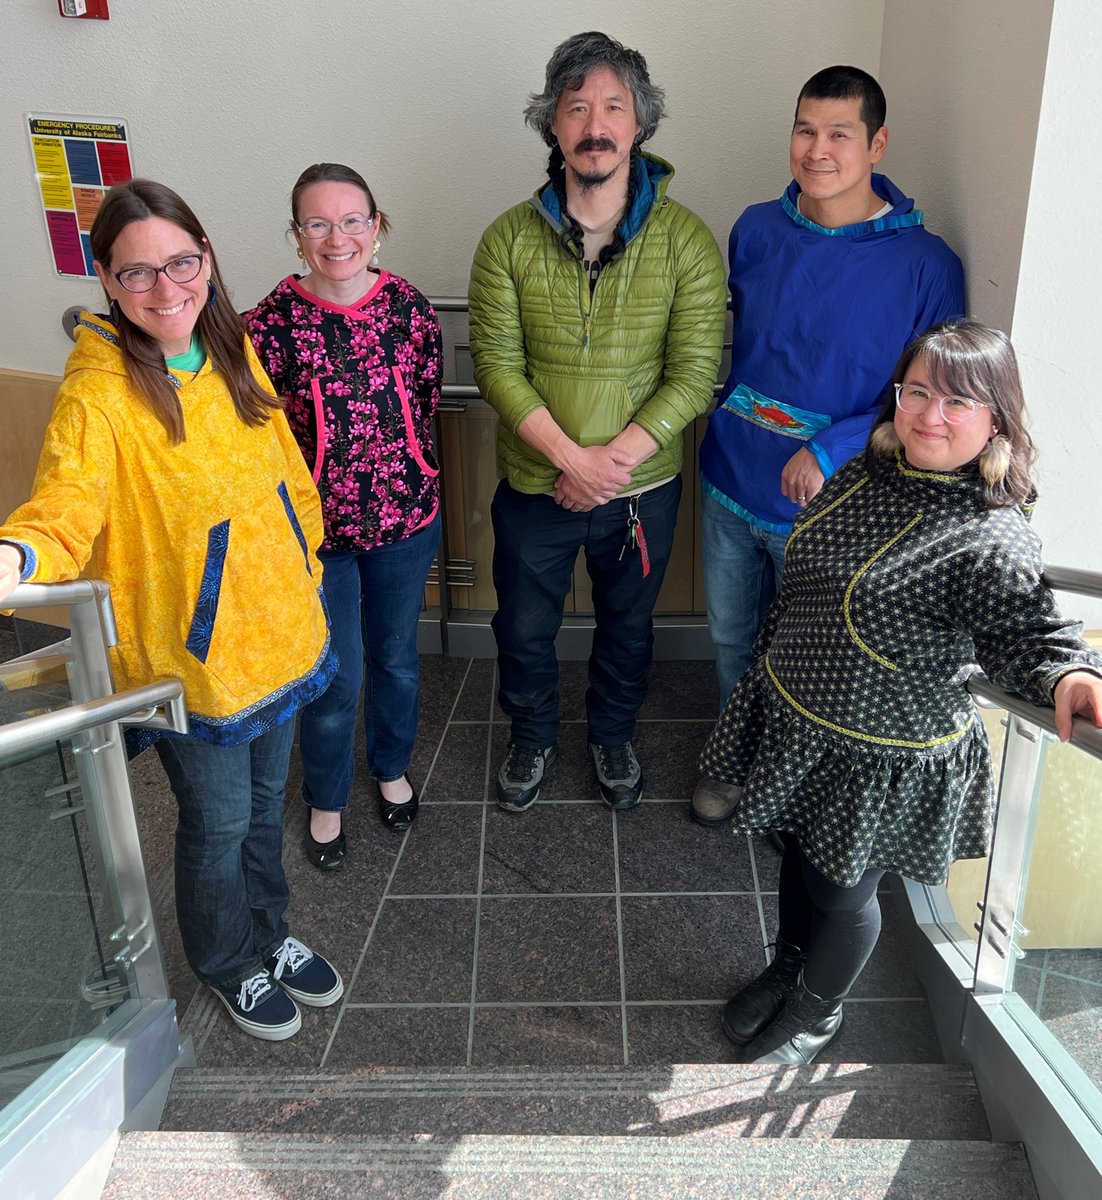 Spring springing here in Fairbanks. Here's another Happy #KuspukFriday from the crew at IARC.